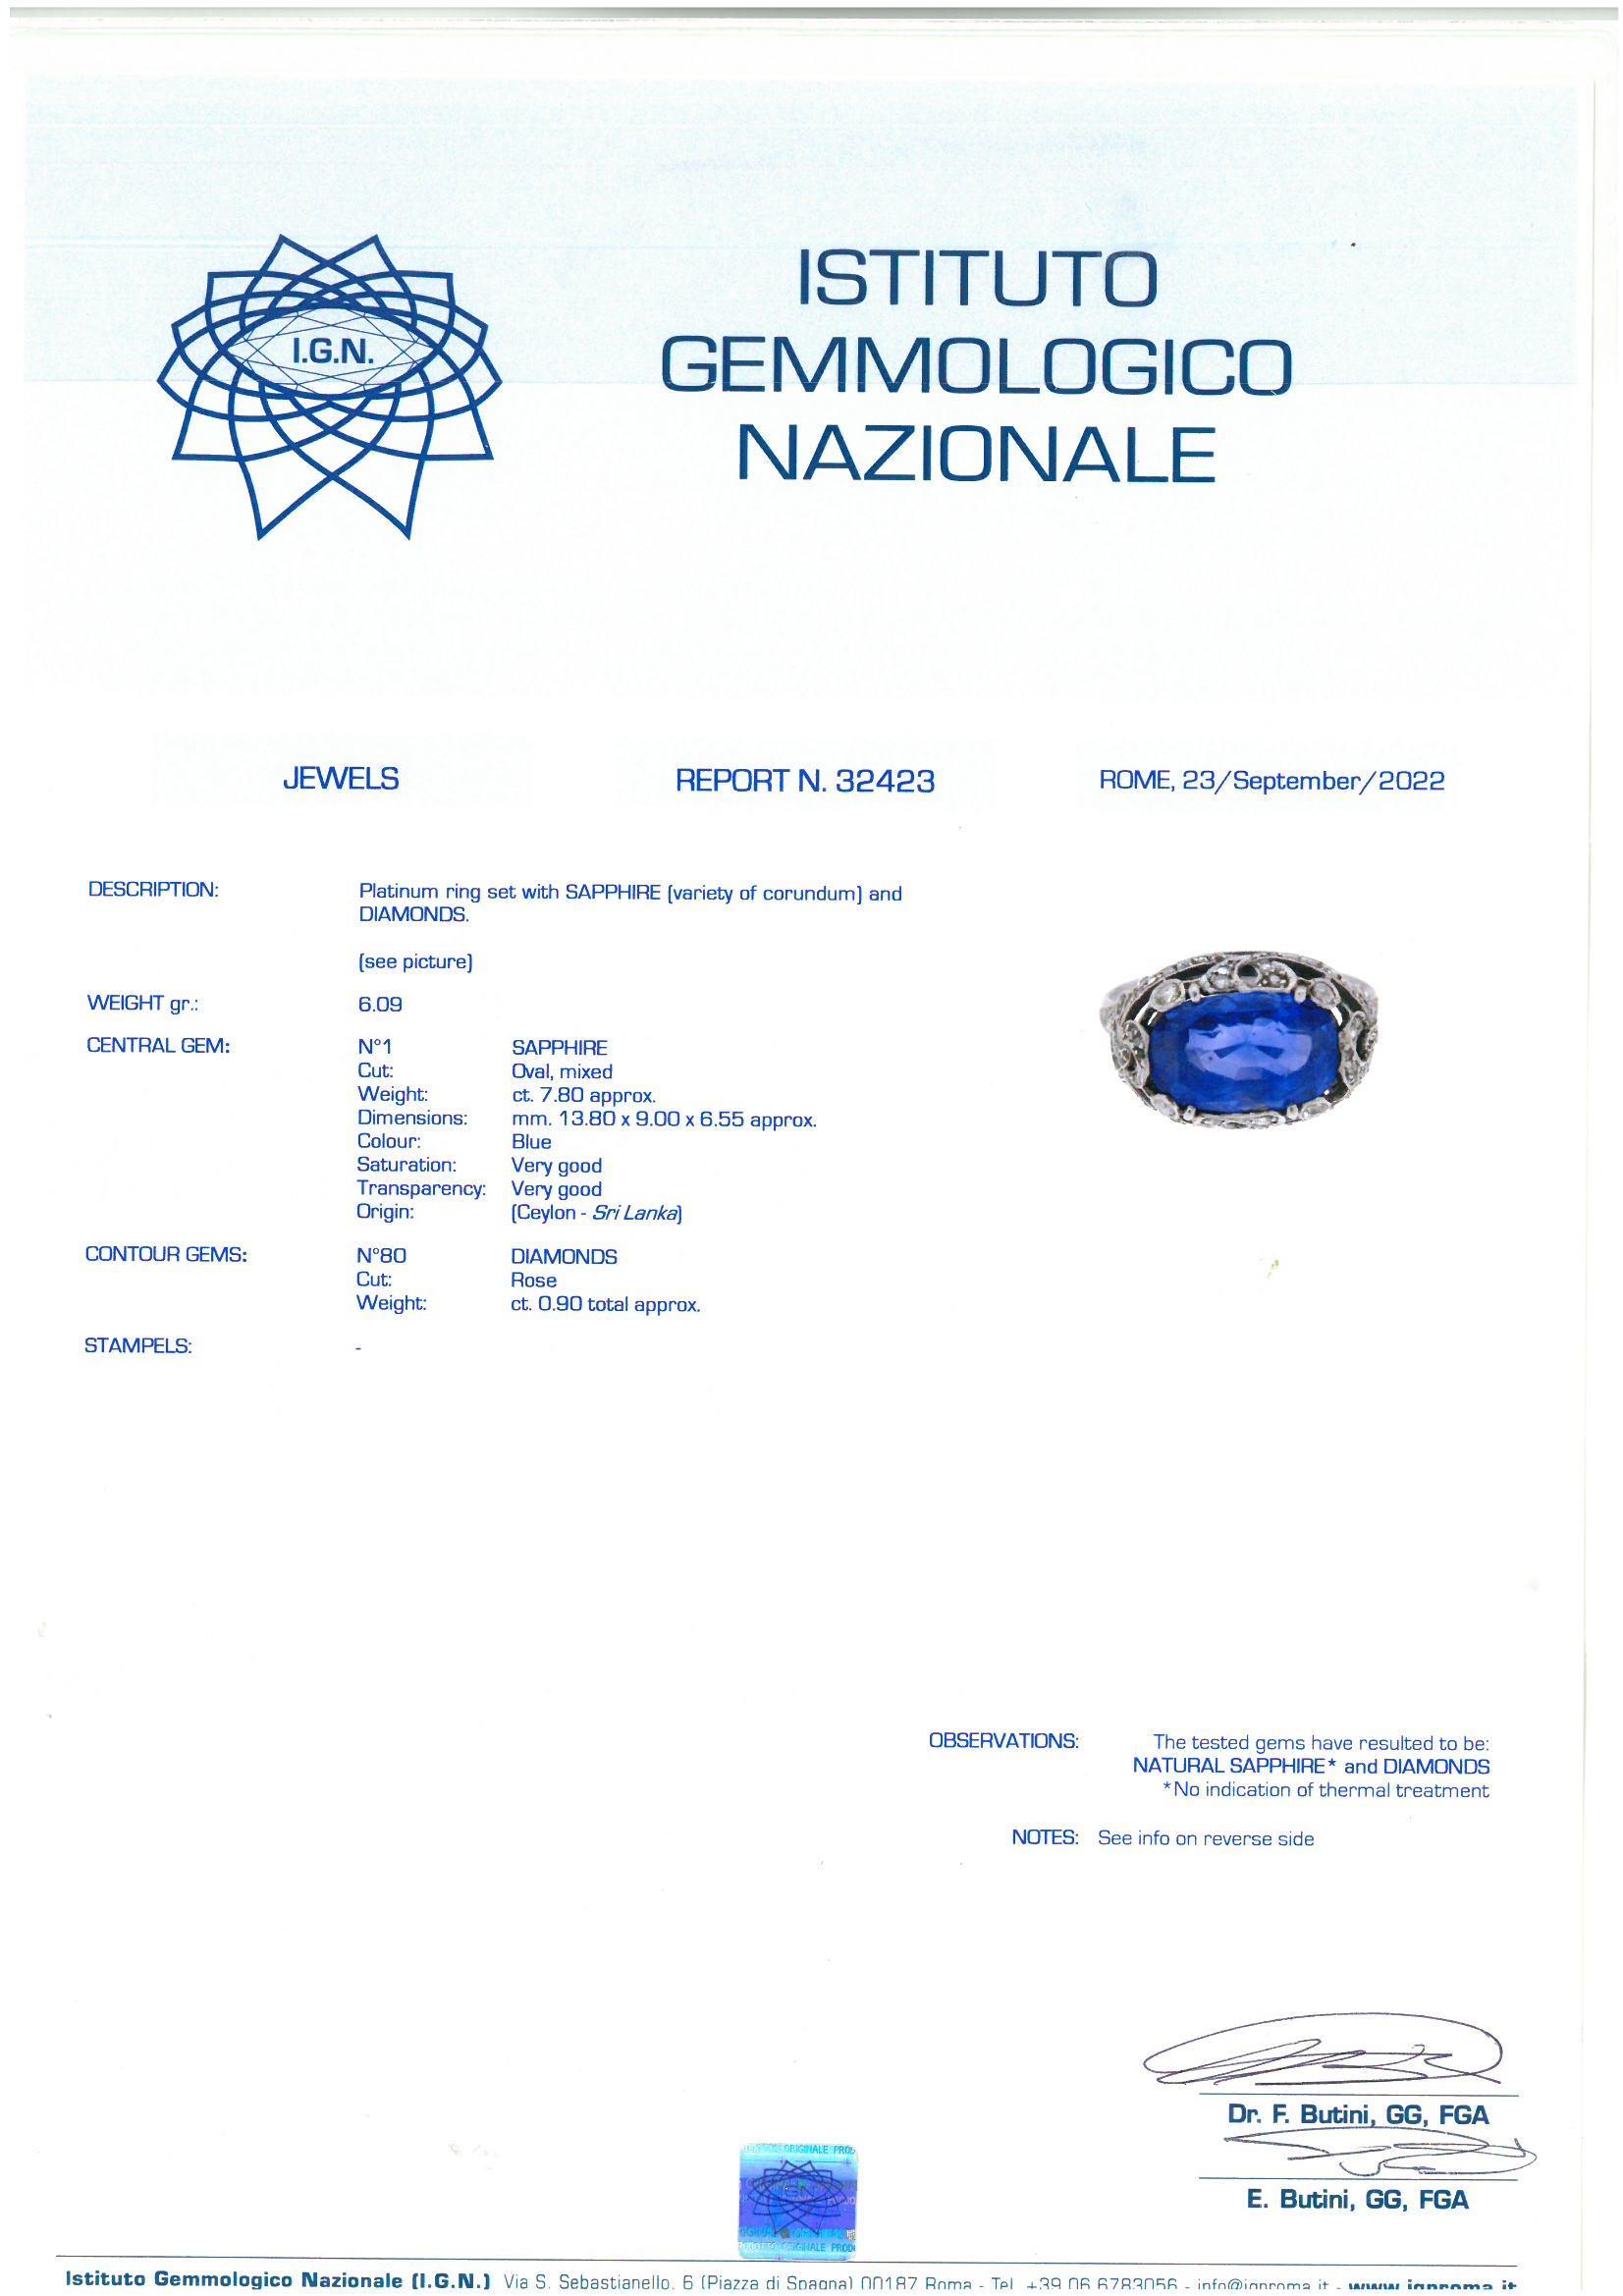 The oval-shaped sapphire, weighing 7.80 carats, within a pierced floral gallery millegrain-set with single and rose-cut diamonds, mounted in platinum
Ring size 8
Weight: 6gr.

Accompanied by a certificate from the IGN Laboratory of Italy, stating